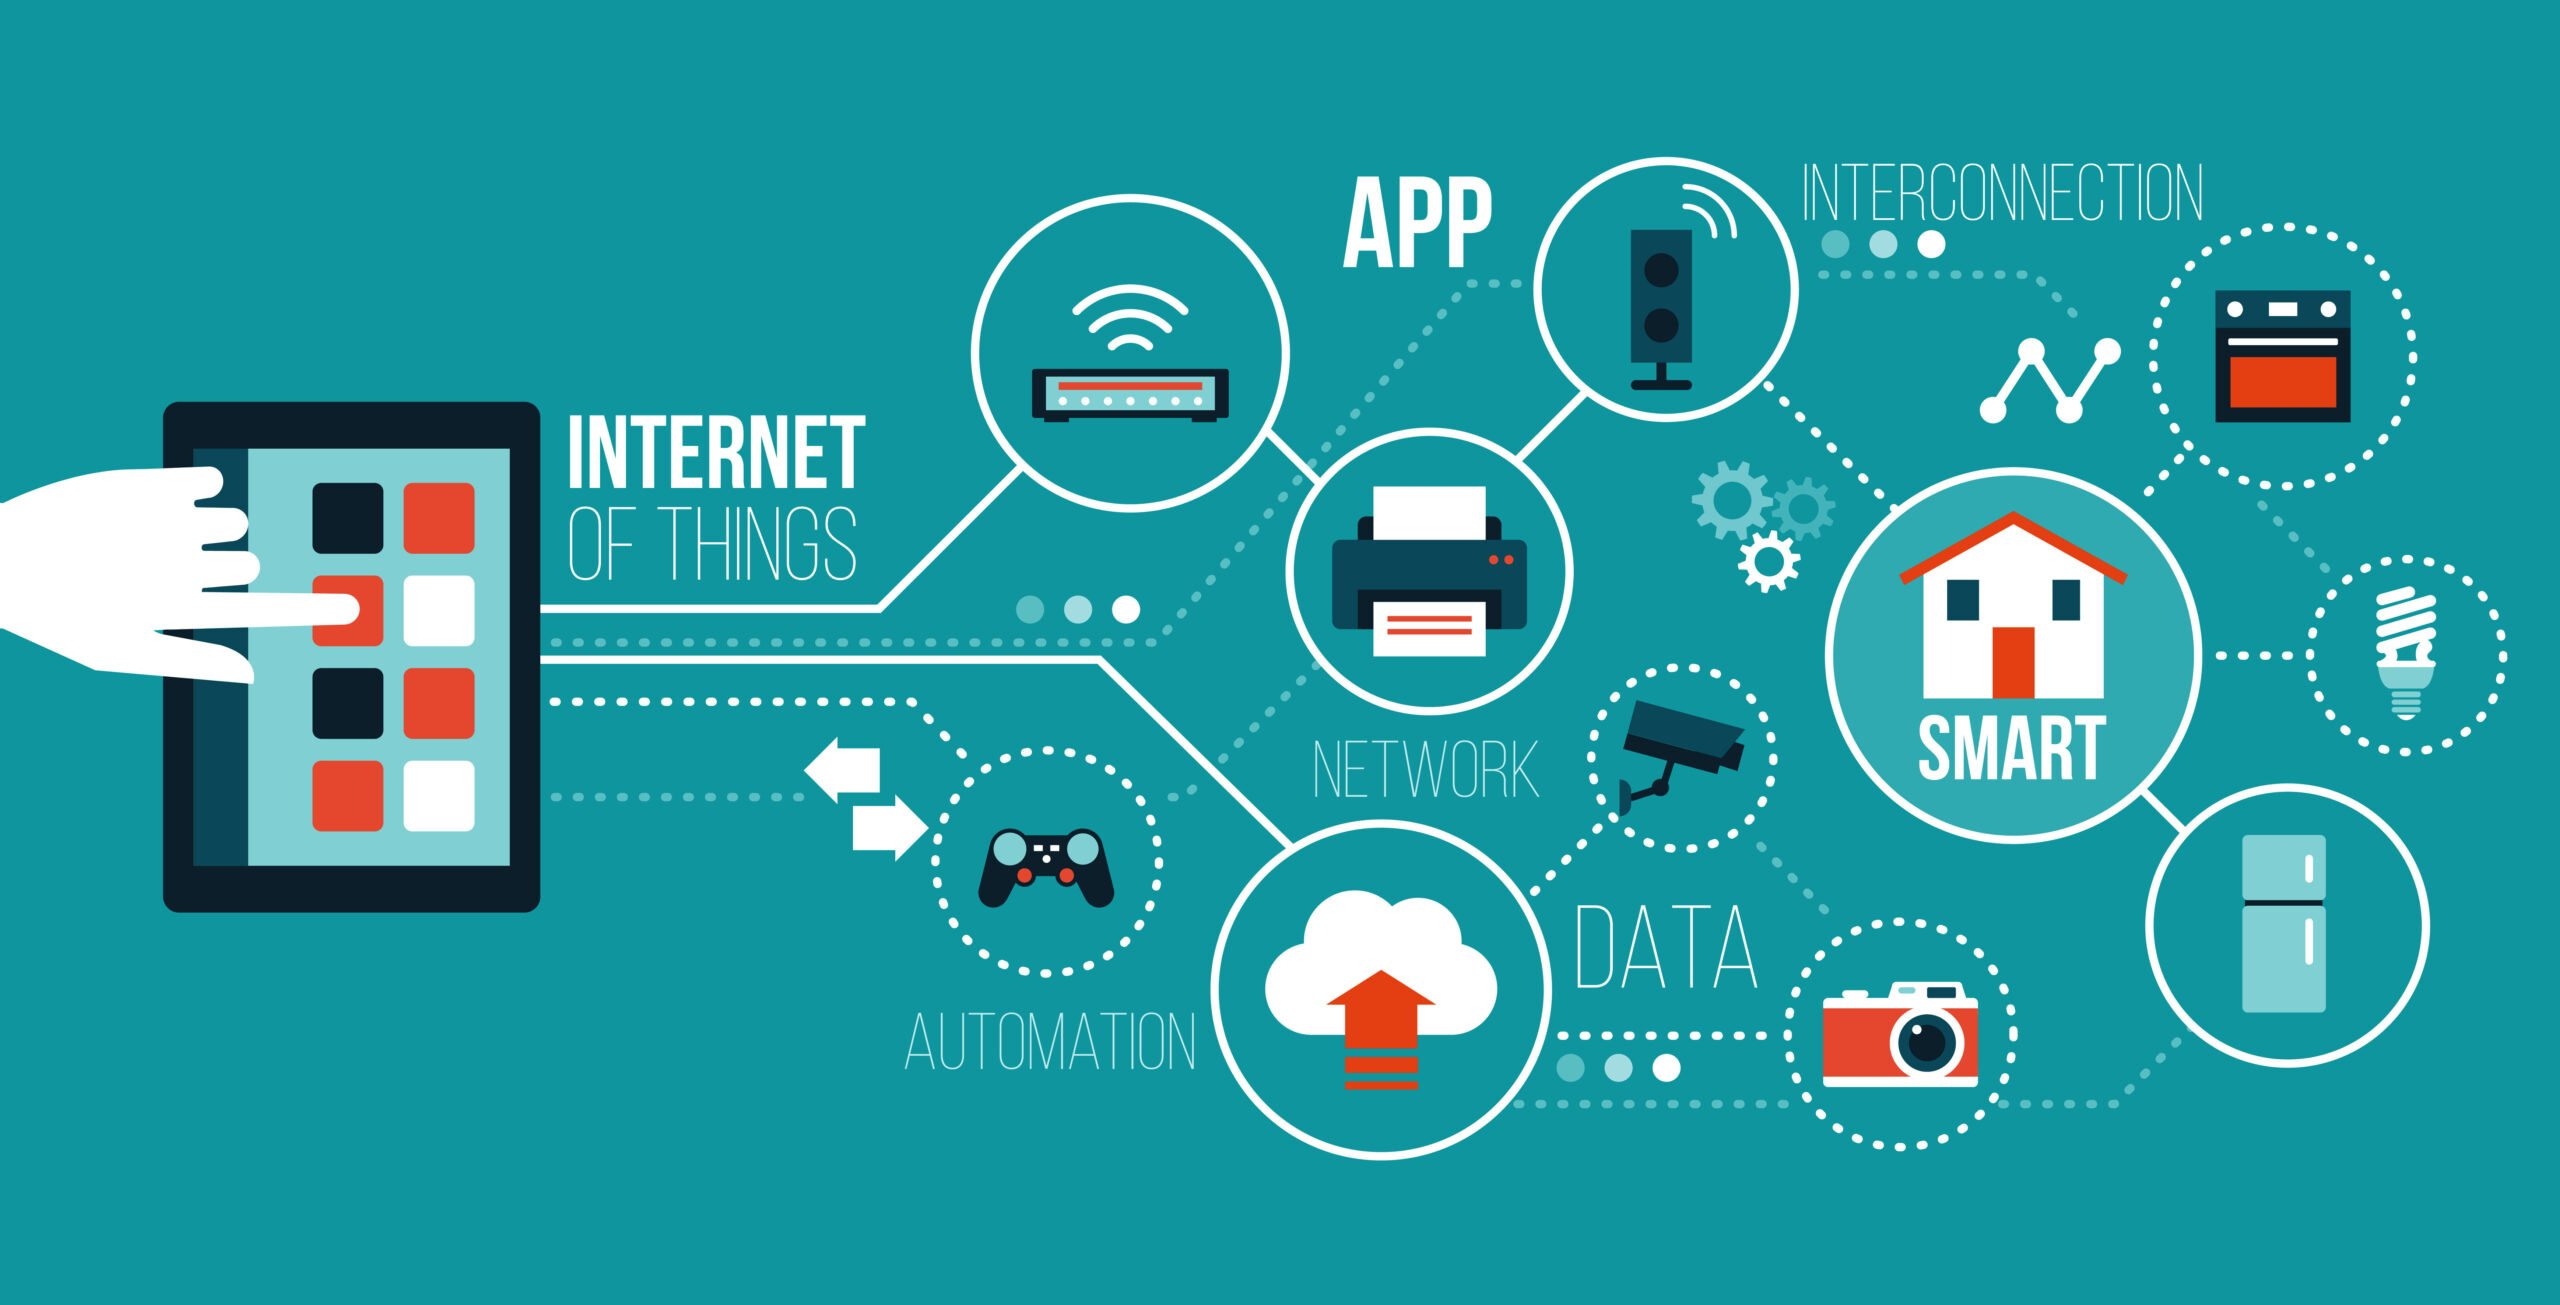 U.S. Department of Commerce infographic showing how IoT fosters interconnectivity for apps, automation, data, networks, smart home technology 